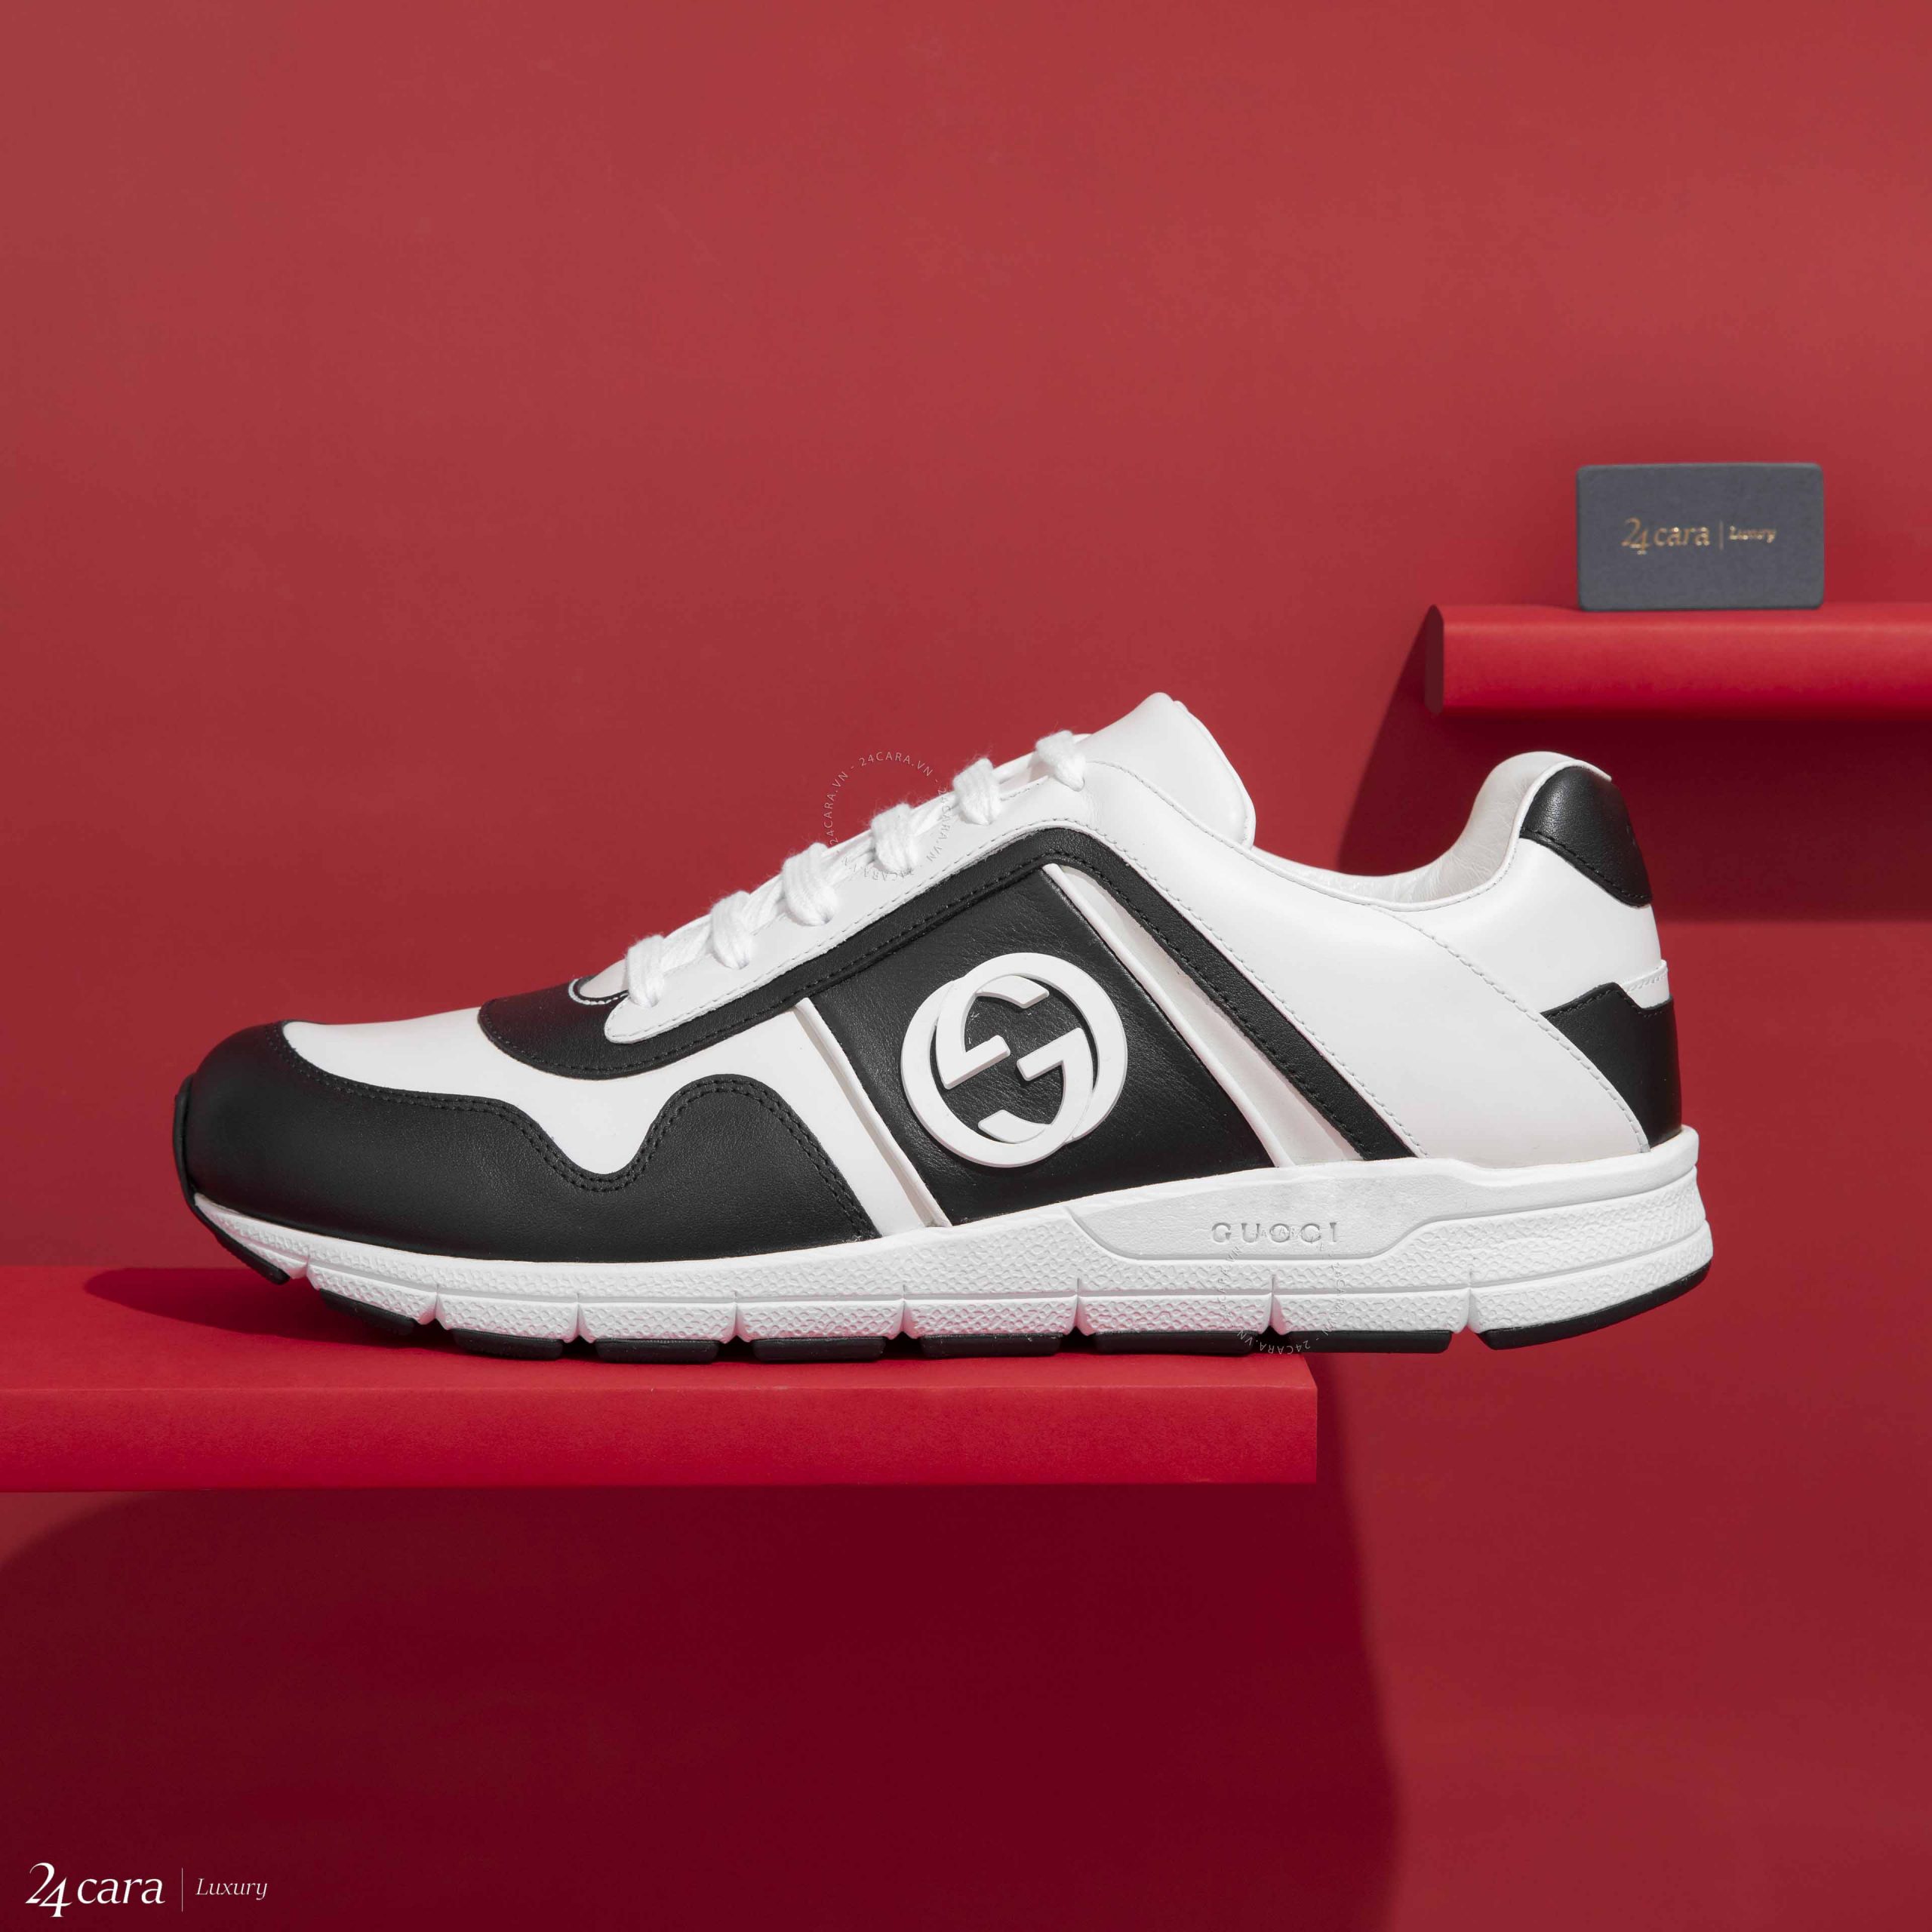 GUCCI BLACK/WHITE LEATHER INTERLOCKING GG LACE UP LOW TOP SNEAKER | 24cara